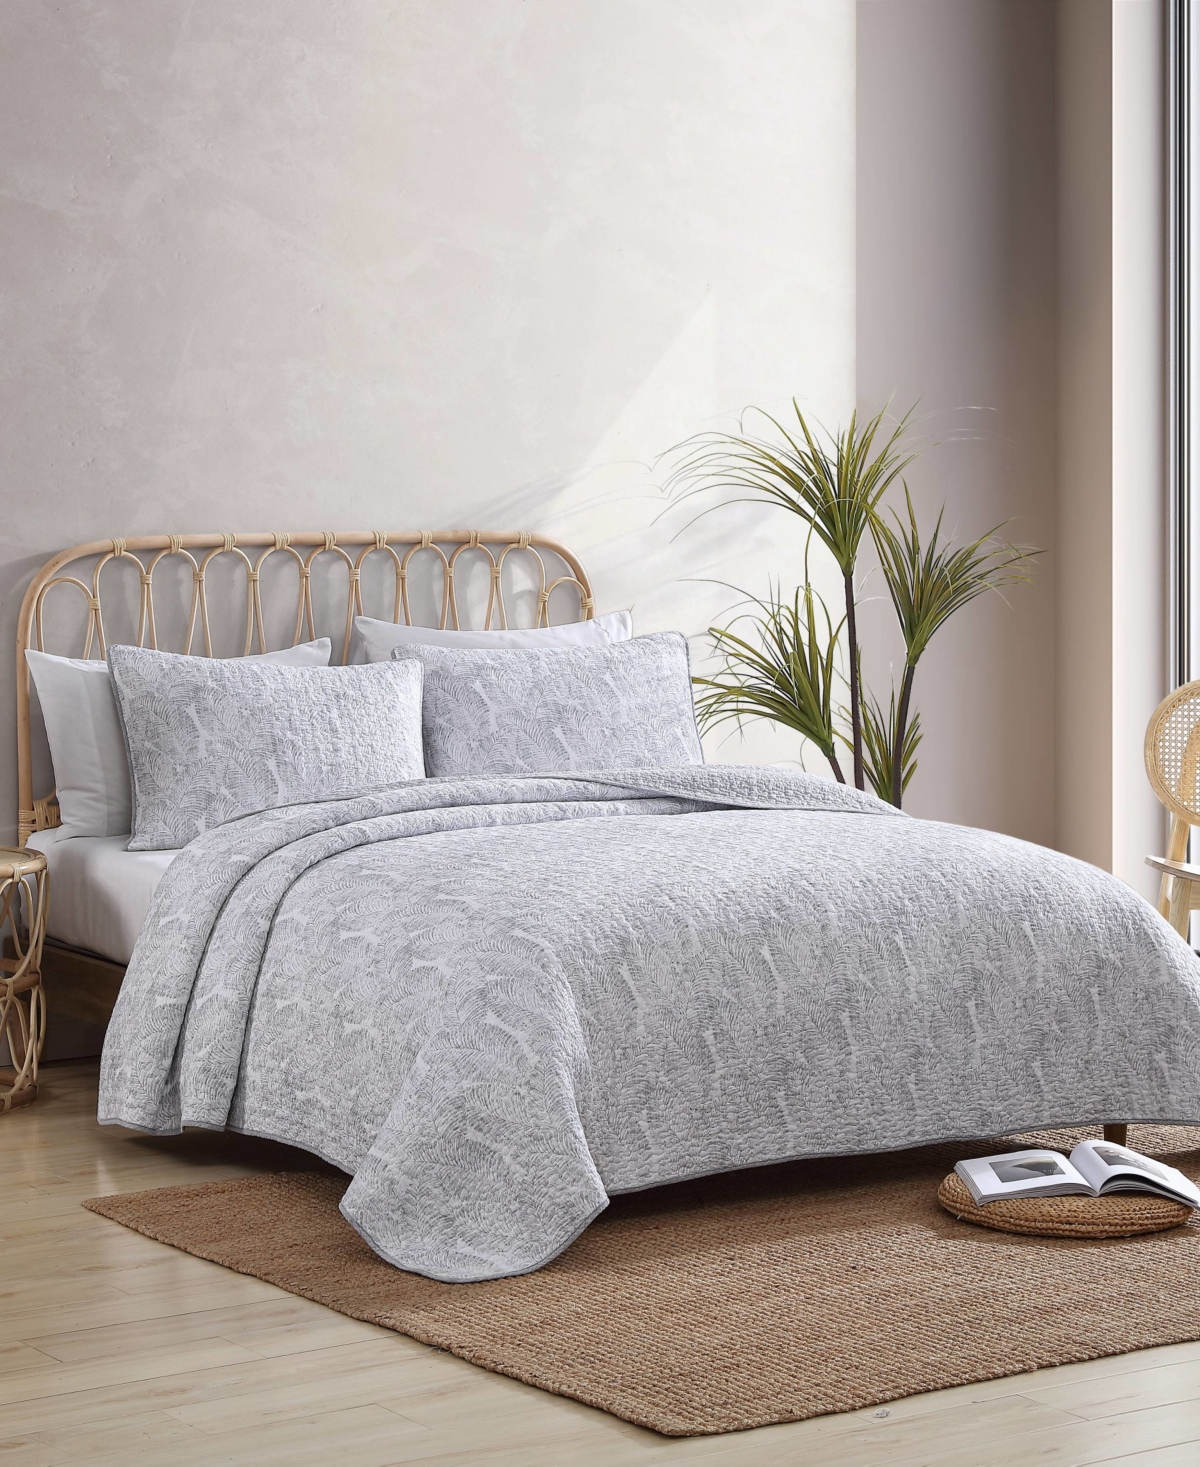 TOMMY BAHAMA HOME CLOSEOUT! TOMMY BAHAMA DISTRESSED WATER LEAVES 3-PC. QUILT SET, KING BEDDING